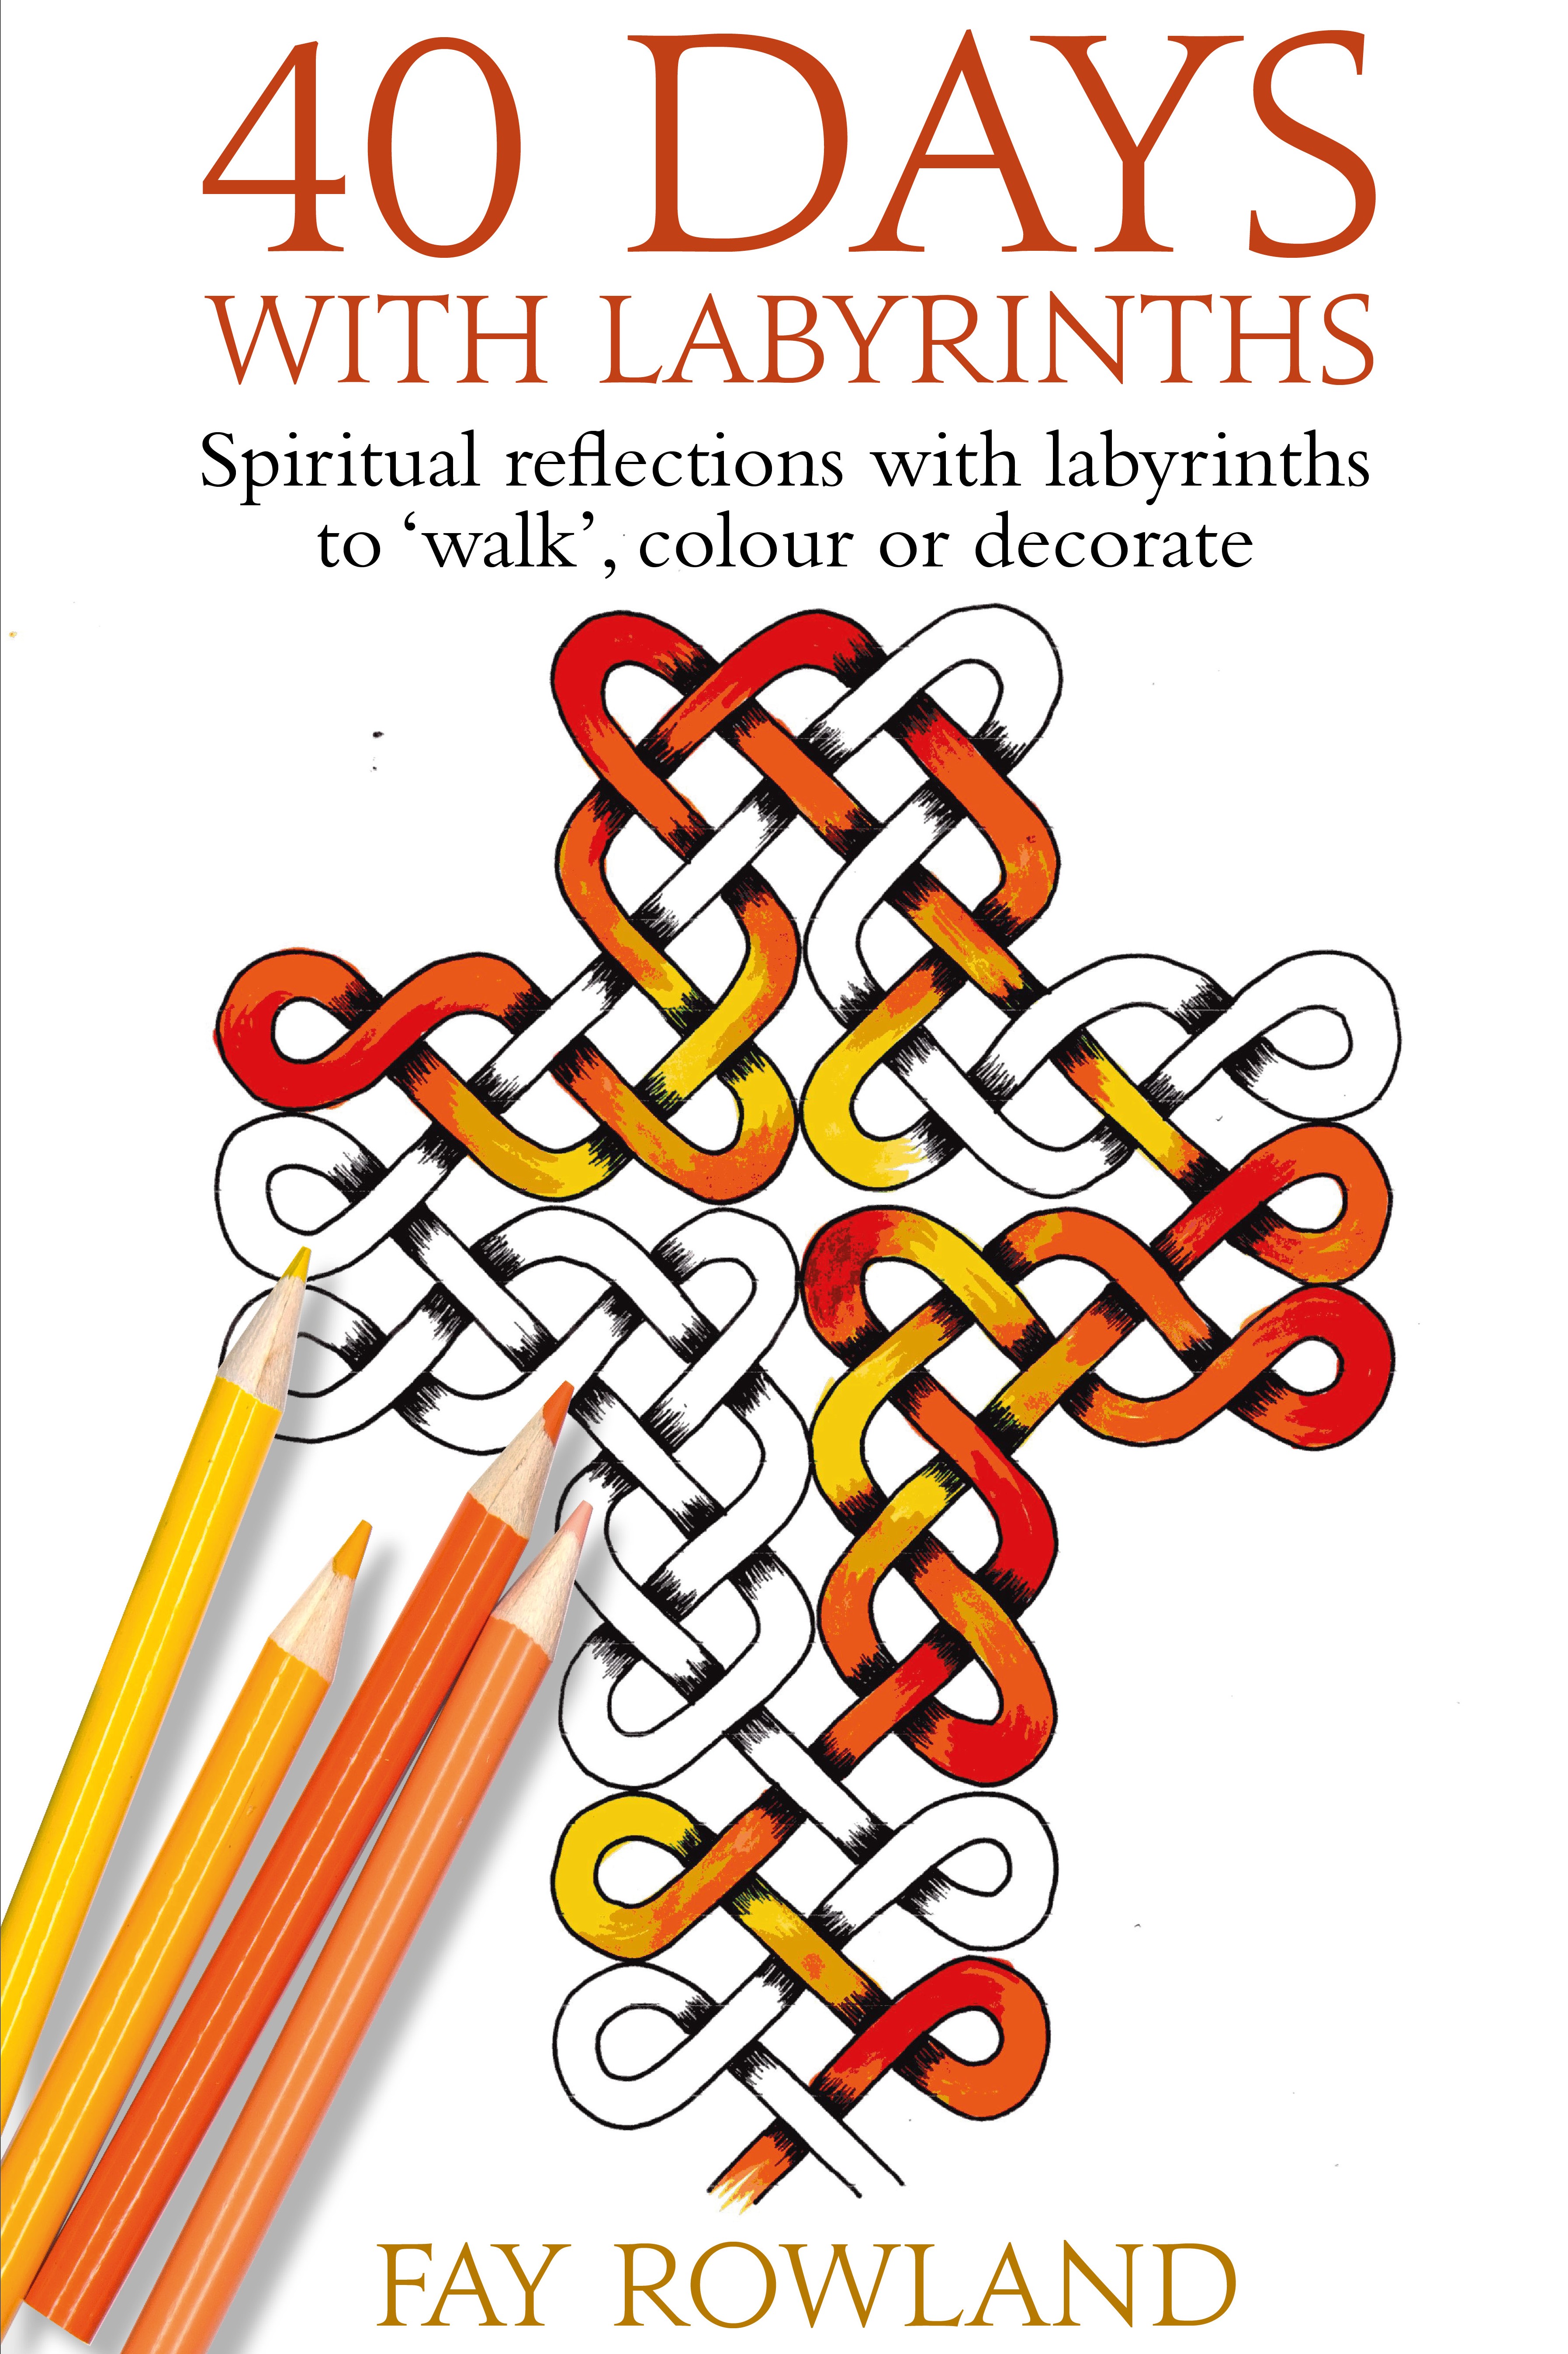 40 Days with Labyrinths: Spiritual reflections with labyrinths to 'walk', colour or decorate